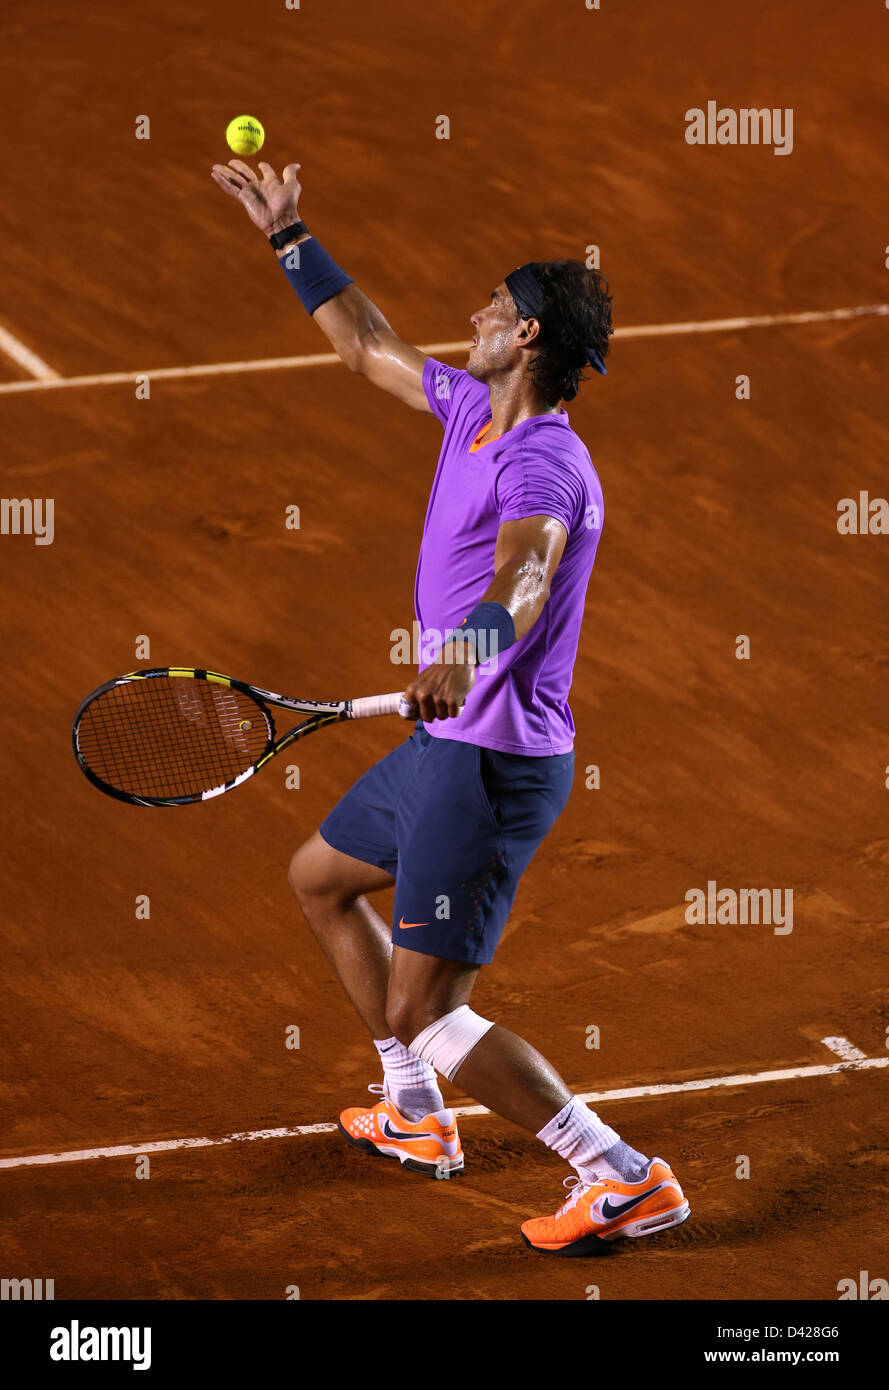 Acapulco, Mexico - Mexican Tennis Open 2013 - Rafael Nadal of Spain tosses  ball to serve against Nicolás